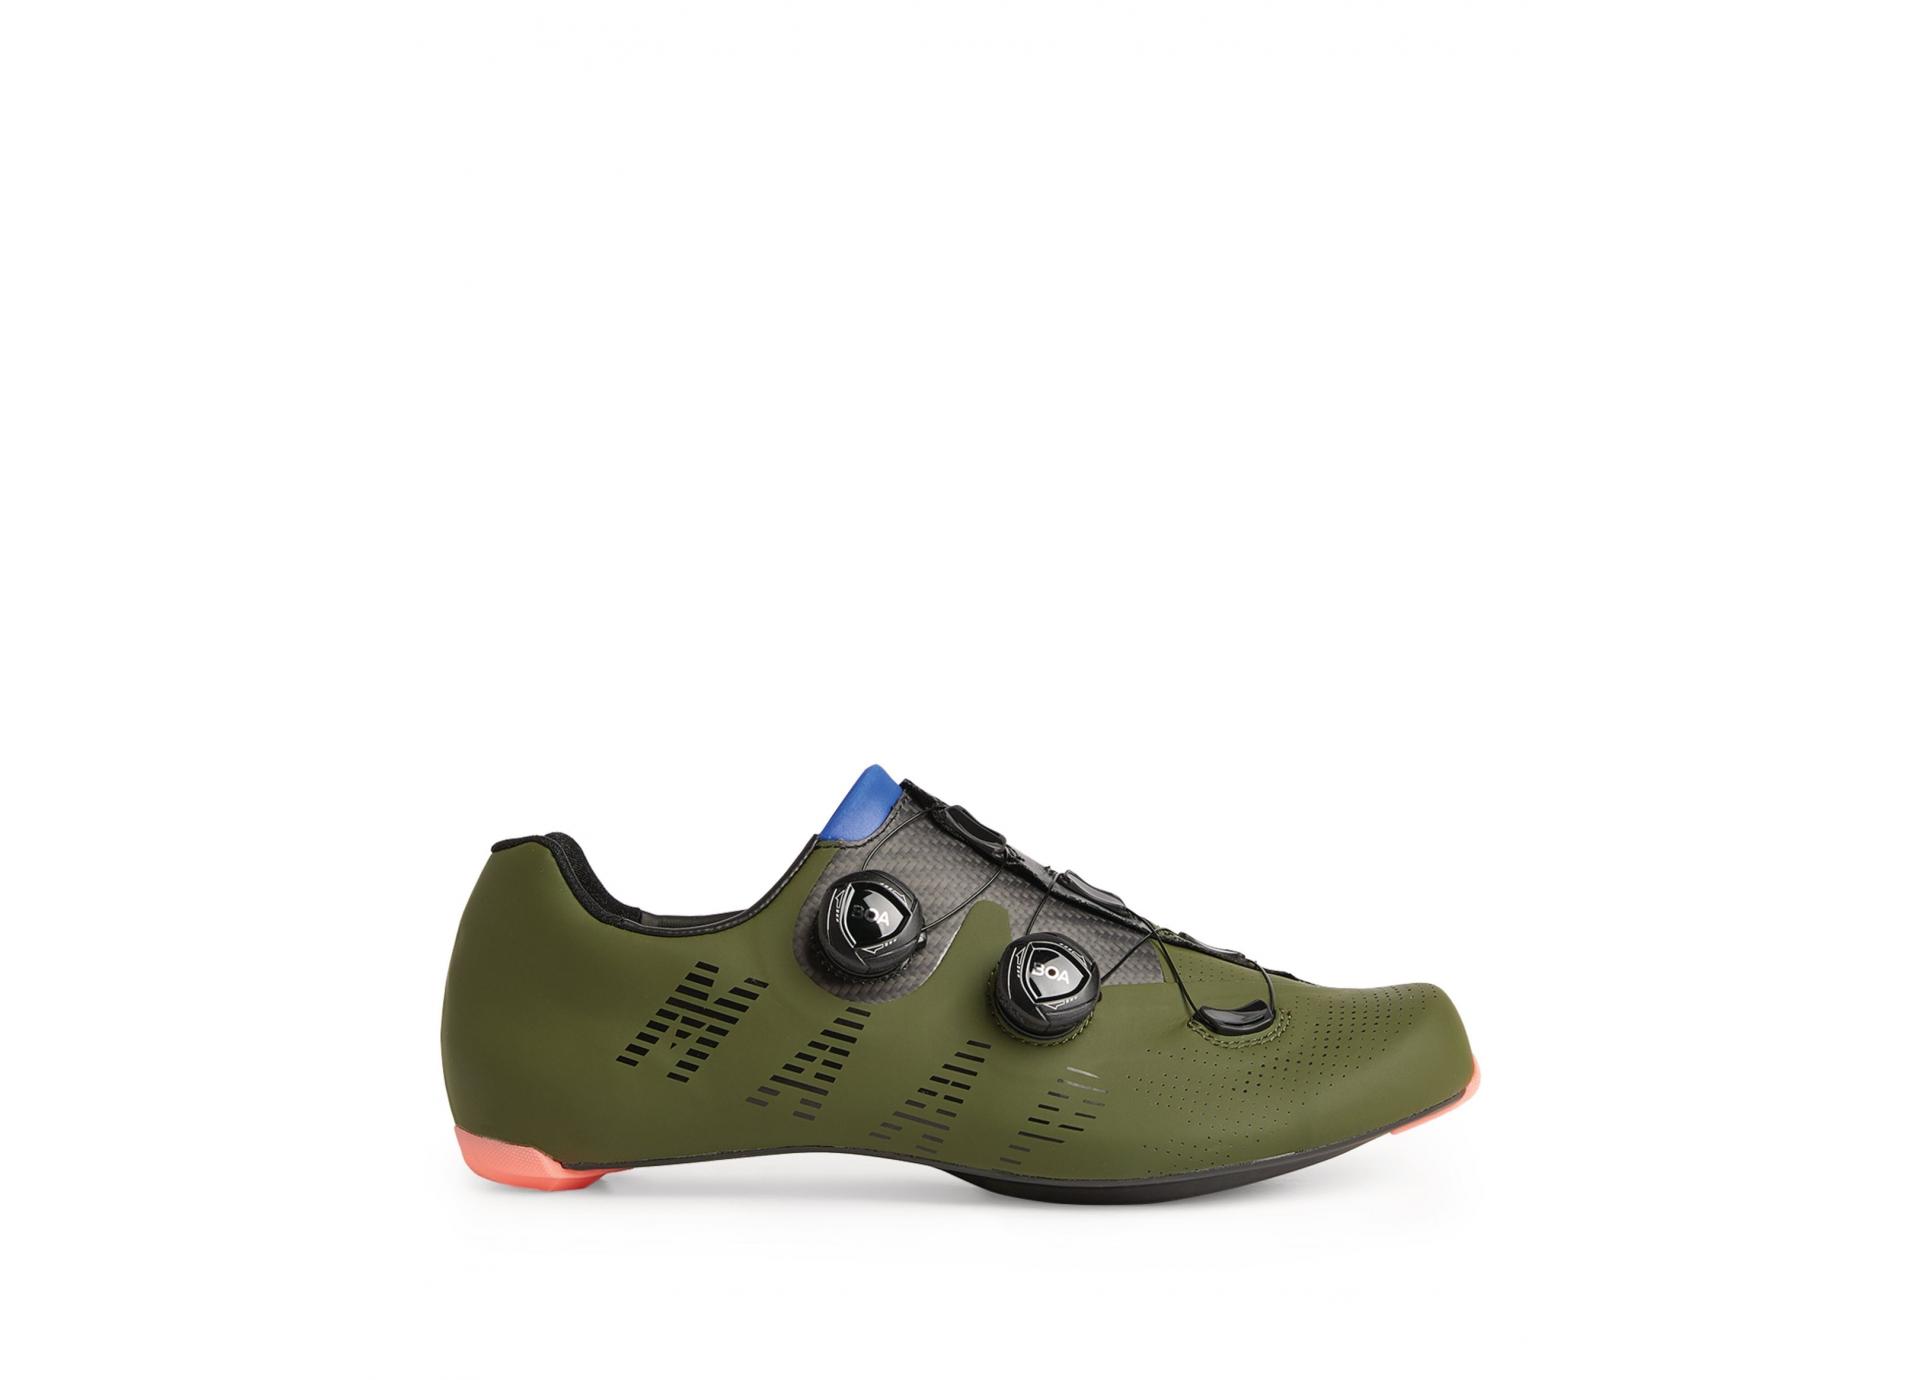 SUPLEST EDGE+ ROAD PRO MAAP ARMY GREEN - Velo7